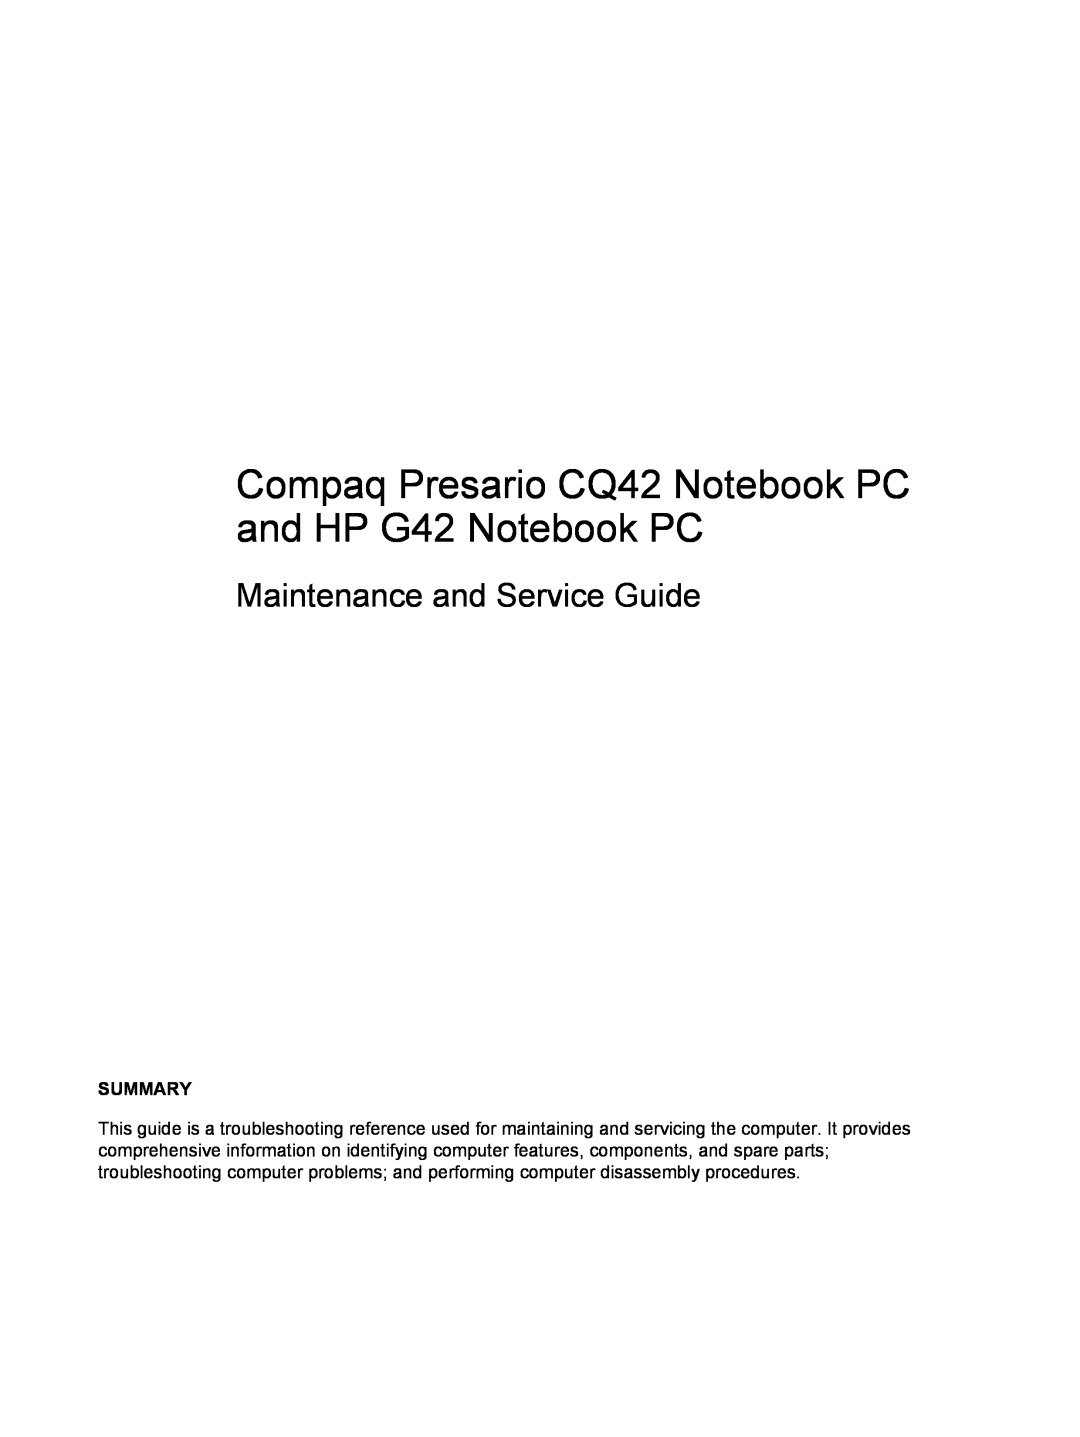 Compaq manual Summary, Compaq Presario CQ42 Notebook PC and HP G42 Notebook PC, Maintenance and Service Guide 